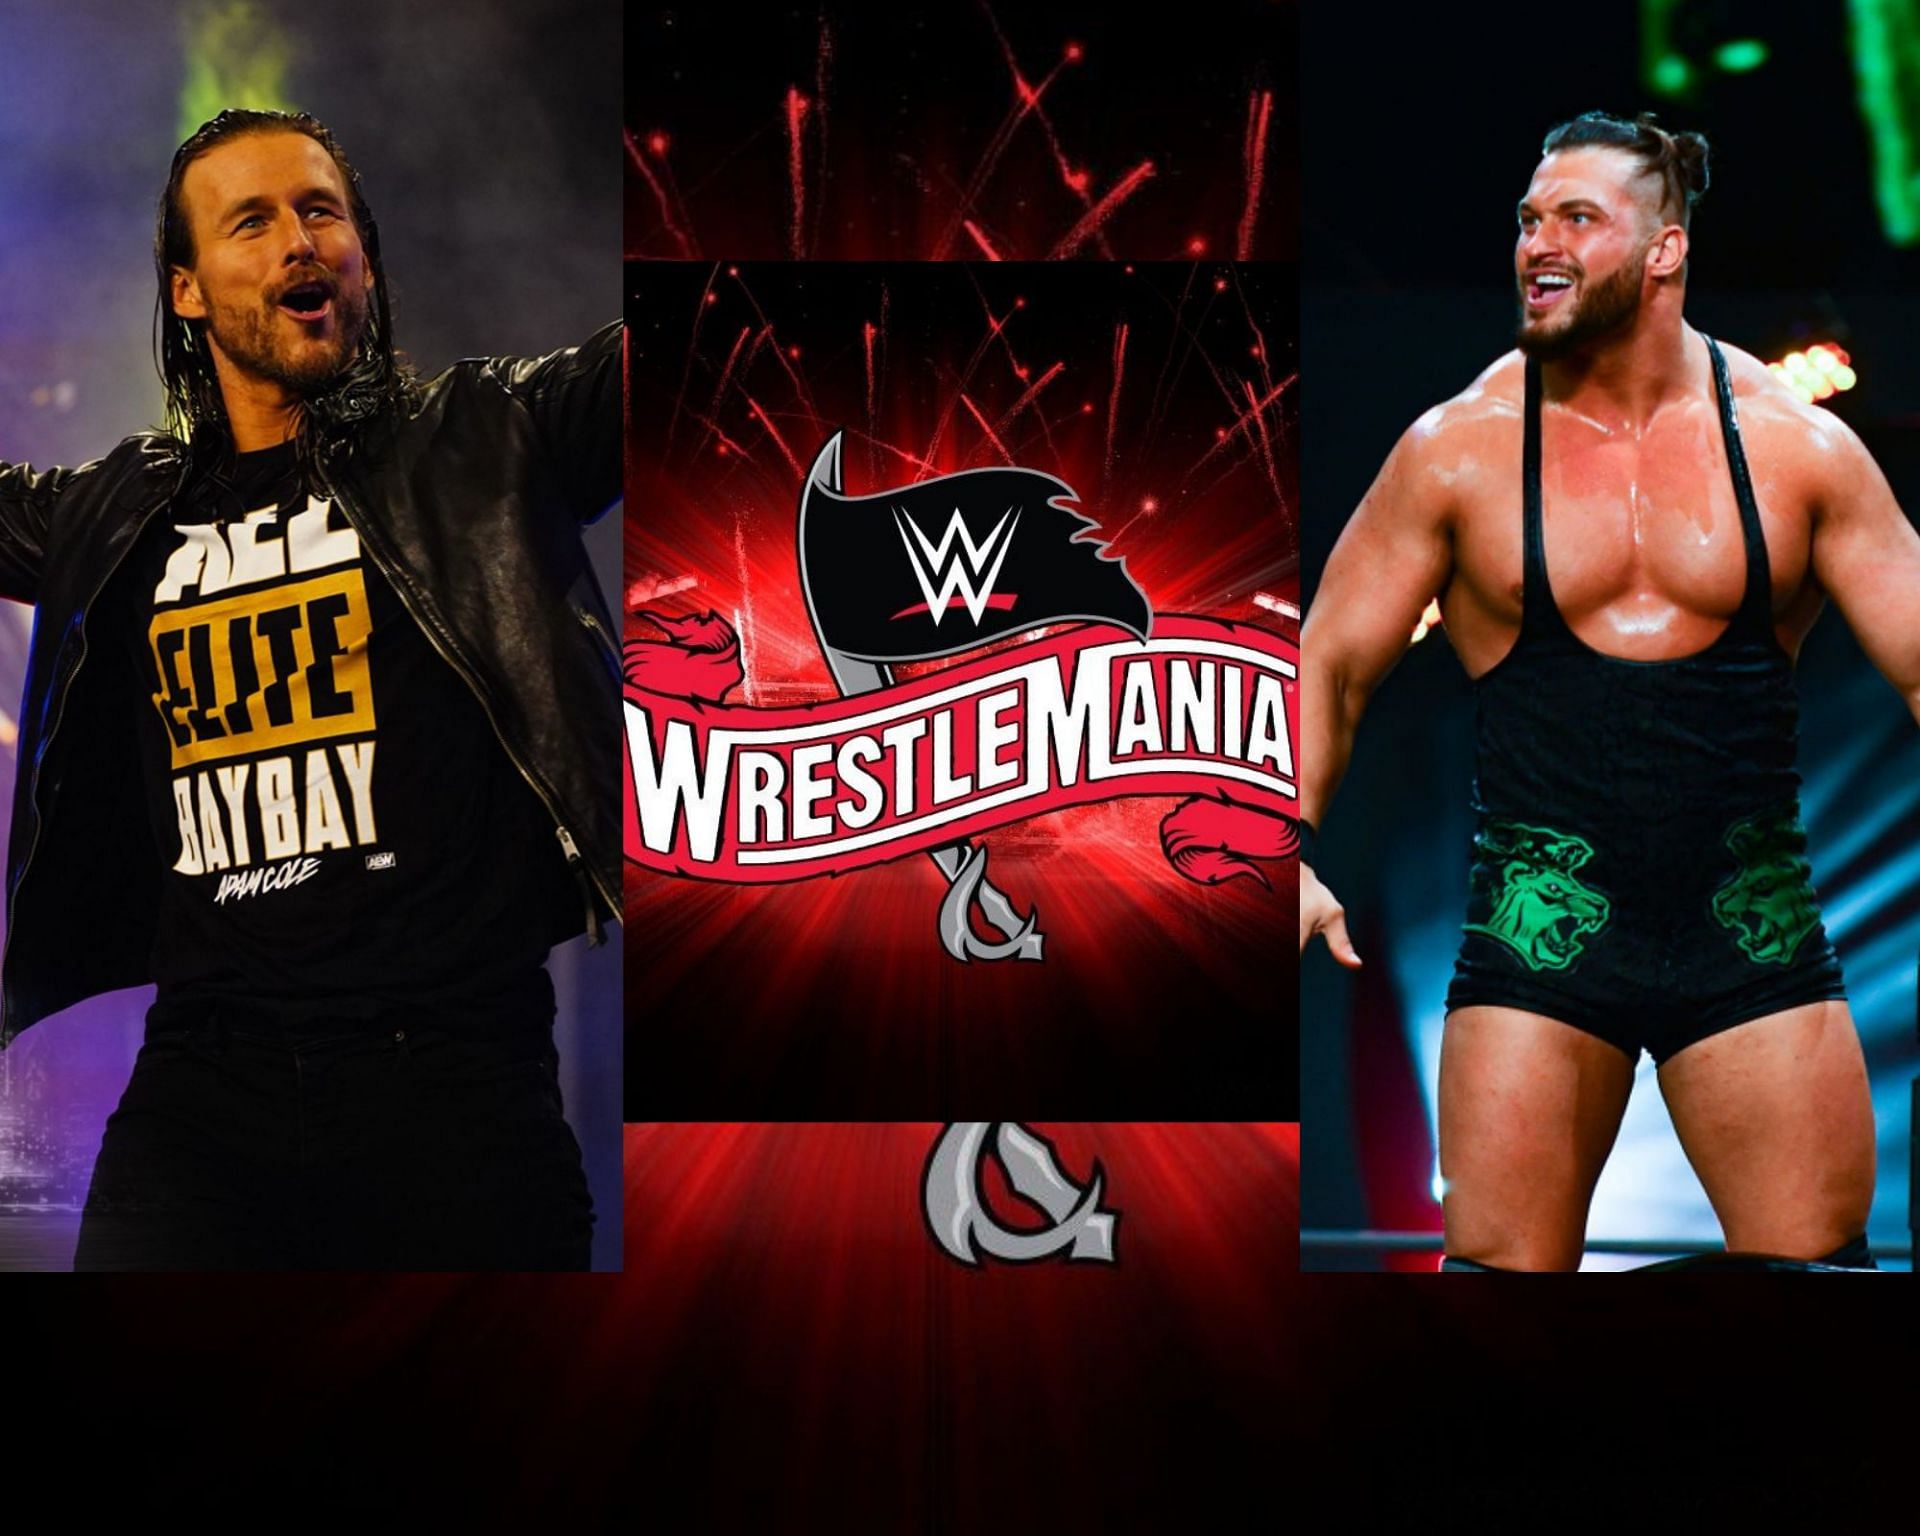 5 AEW stars who could main event WrestleMania someday